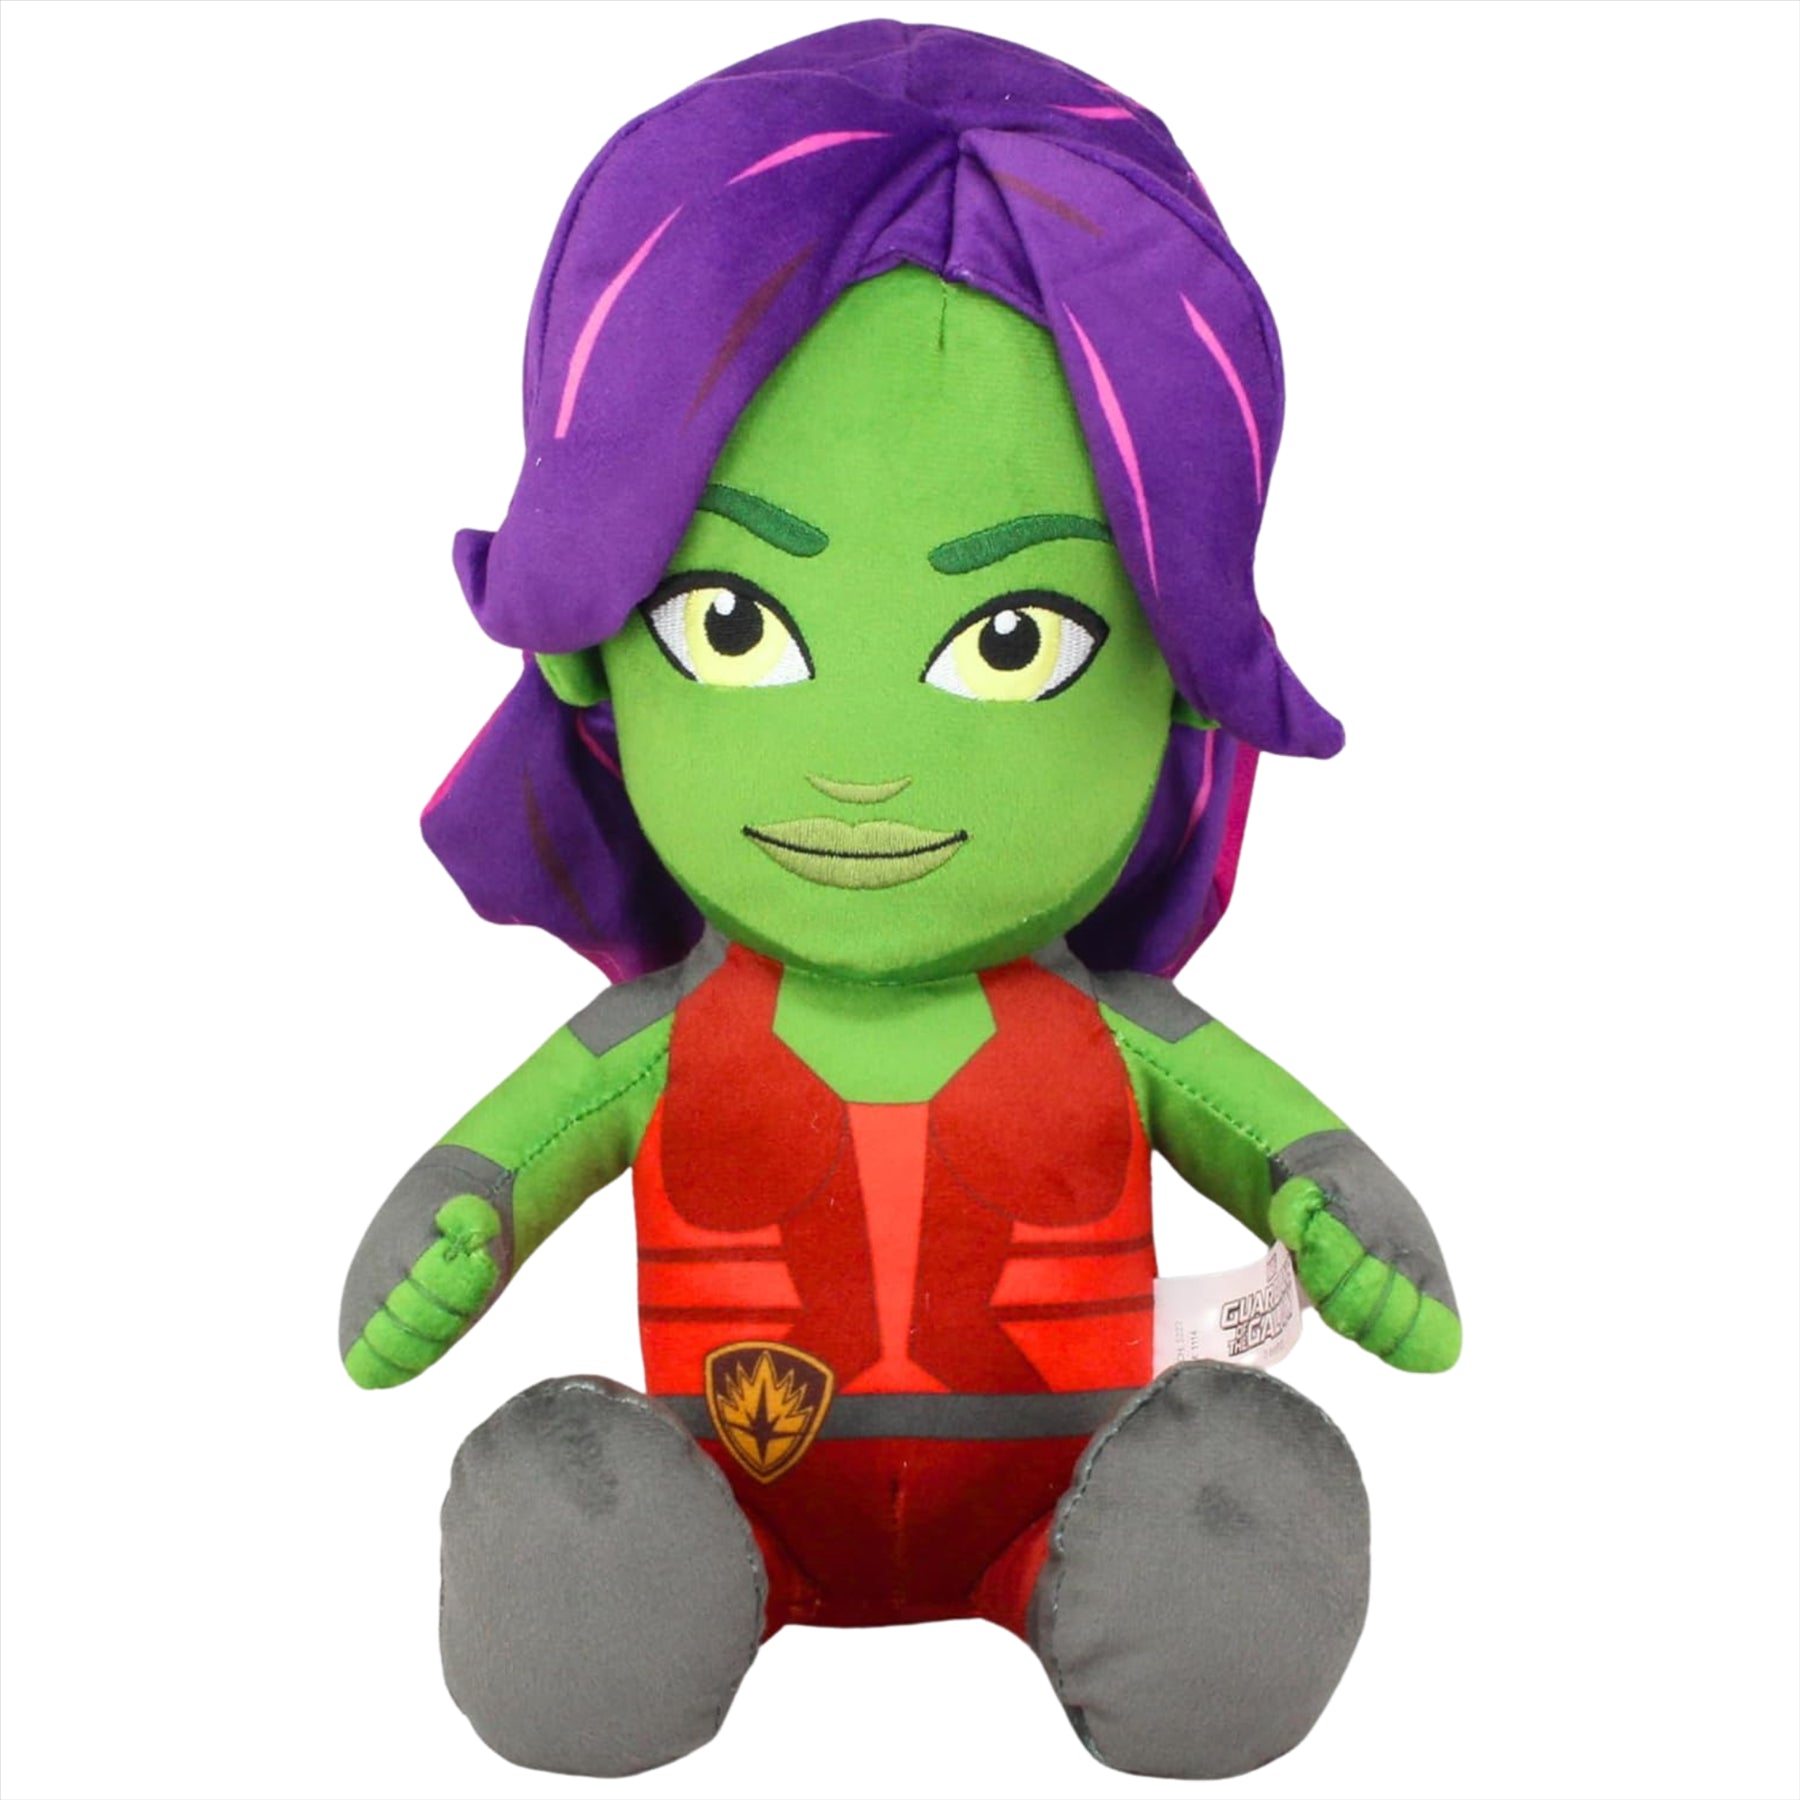 Guardians of the Galaxy Avengers Gamora Super Soft Embroidered 36cm Plush Toy